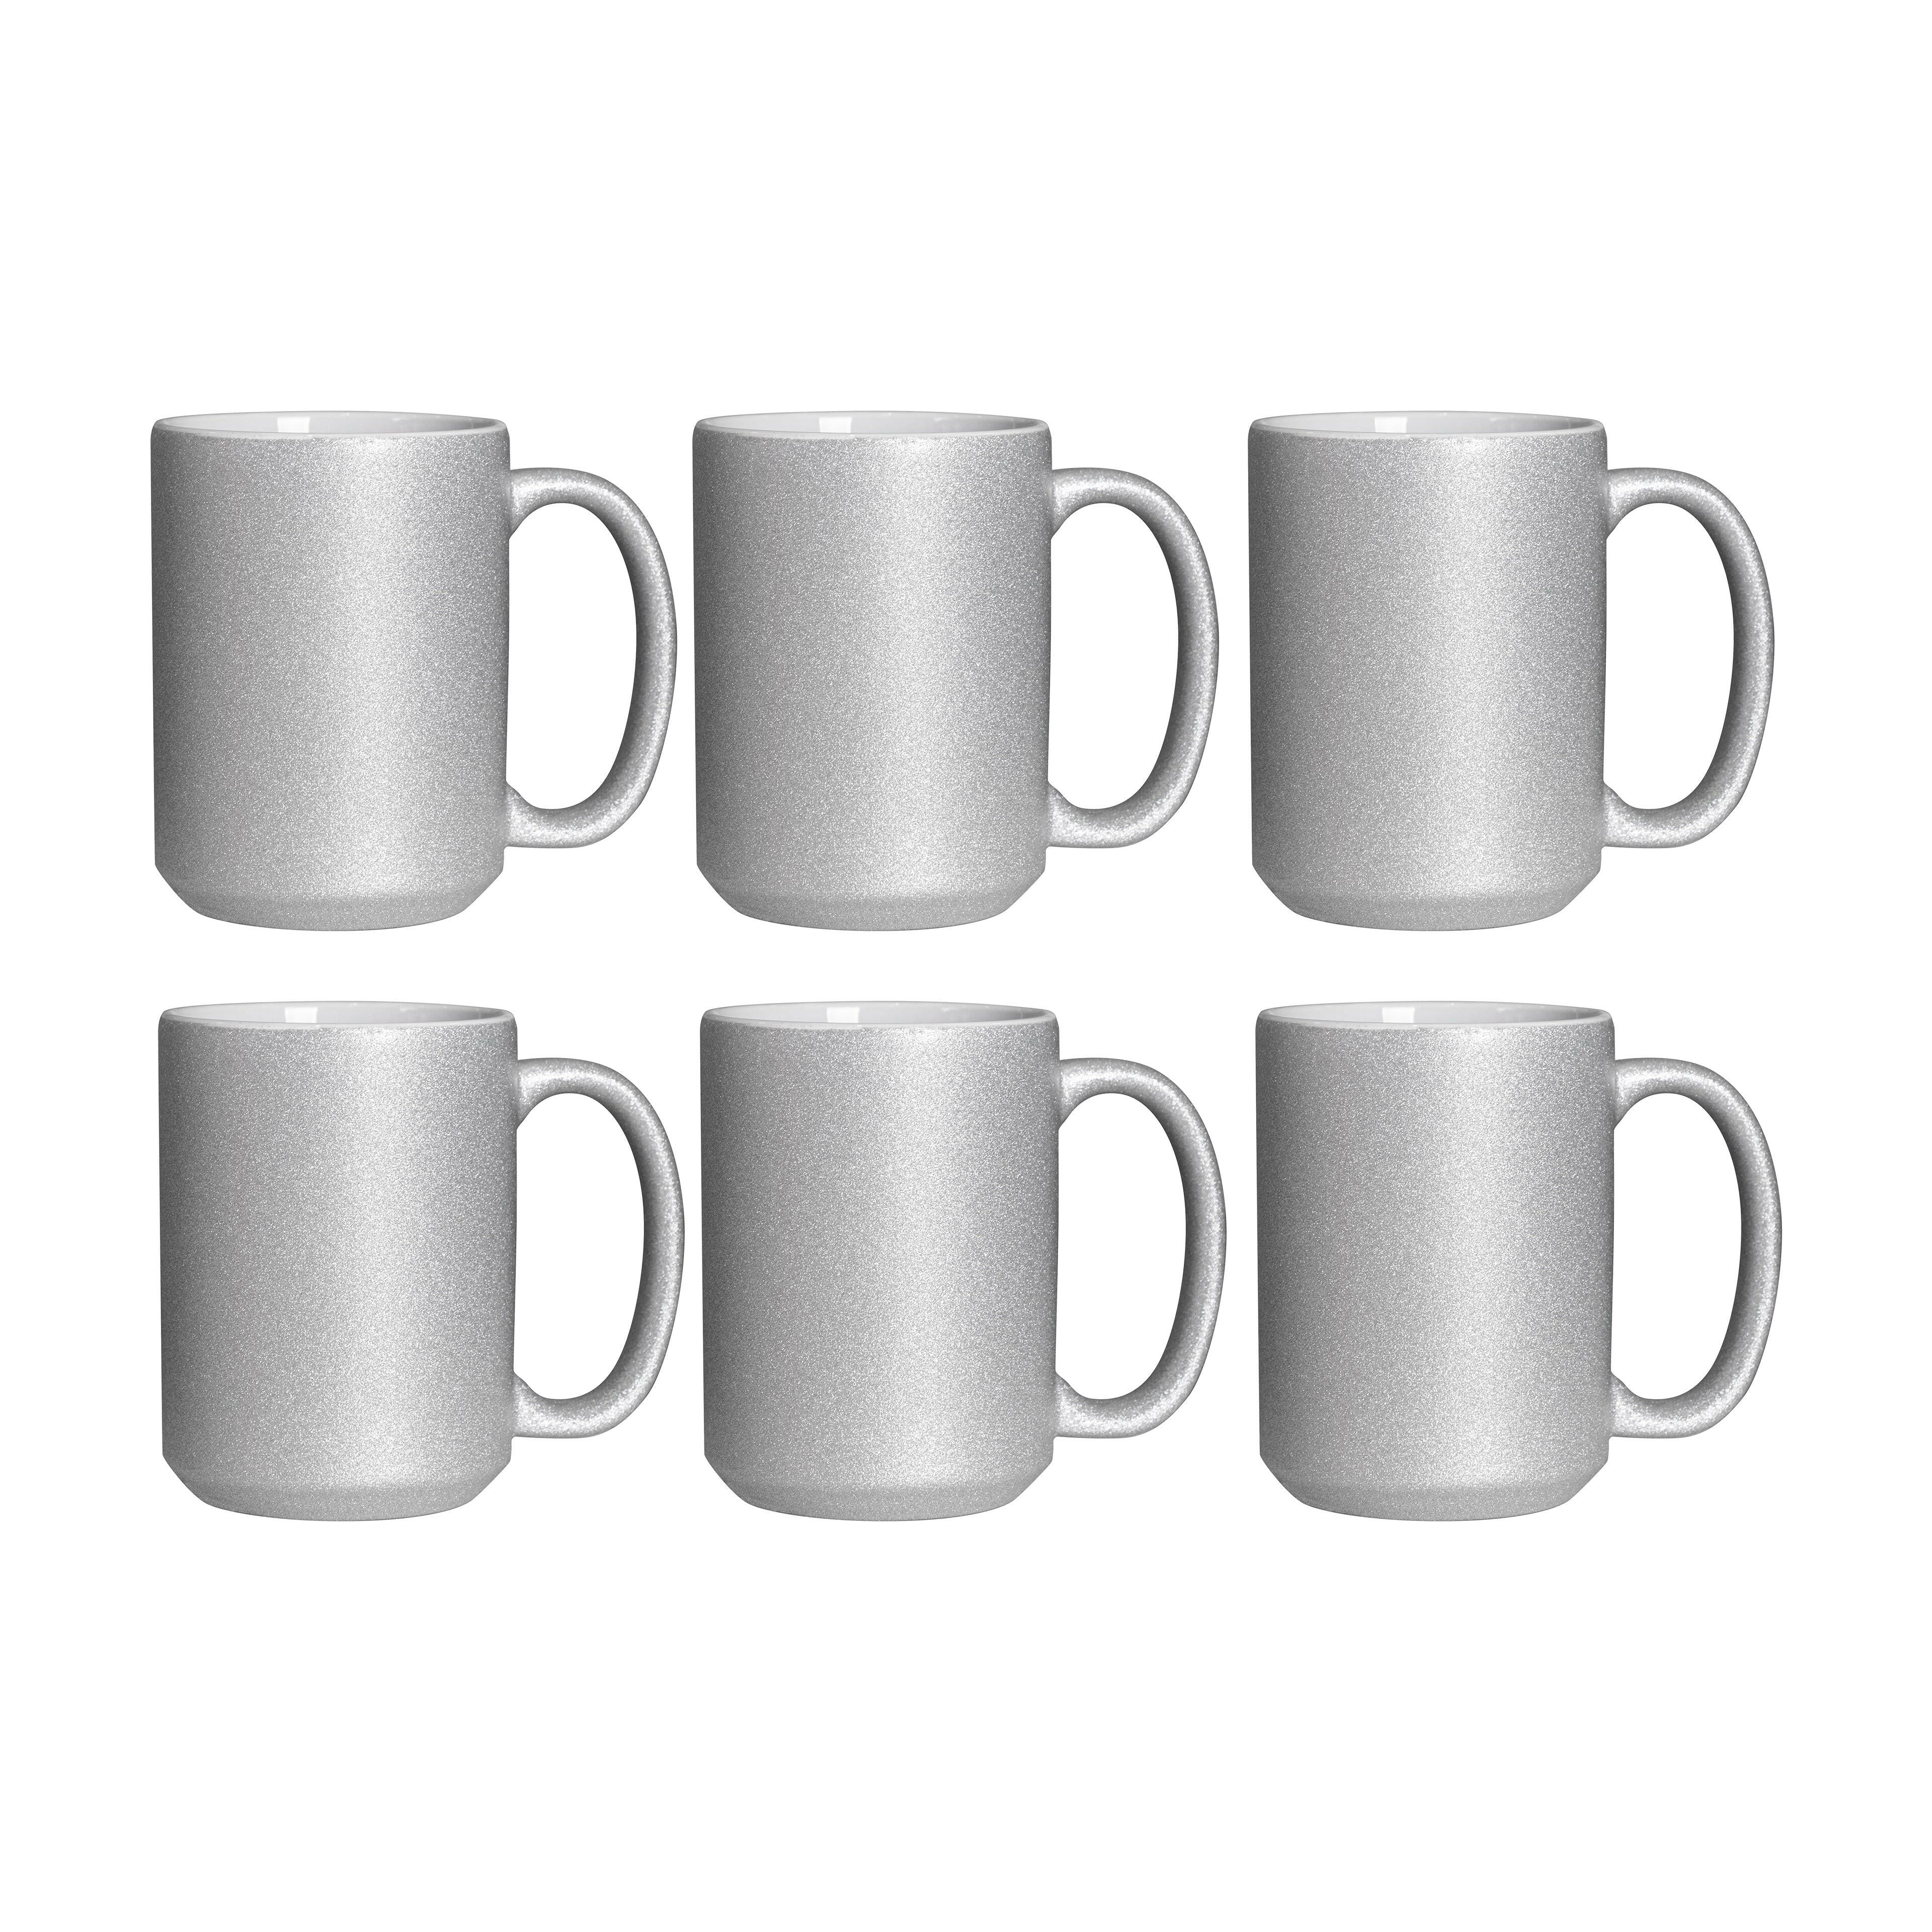 15oz Silver Glitter Sublimation Mugs - 6 Pack.